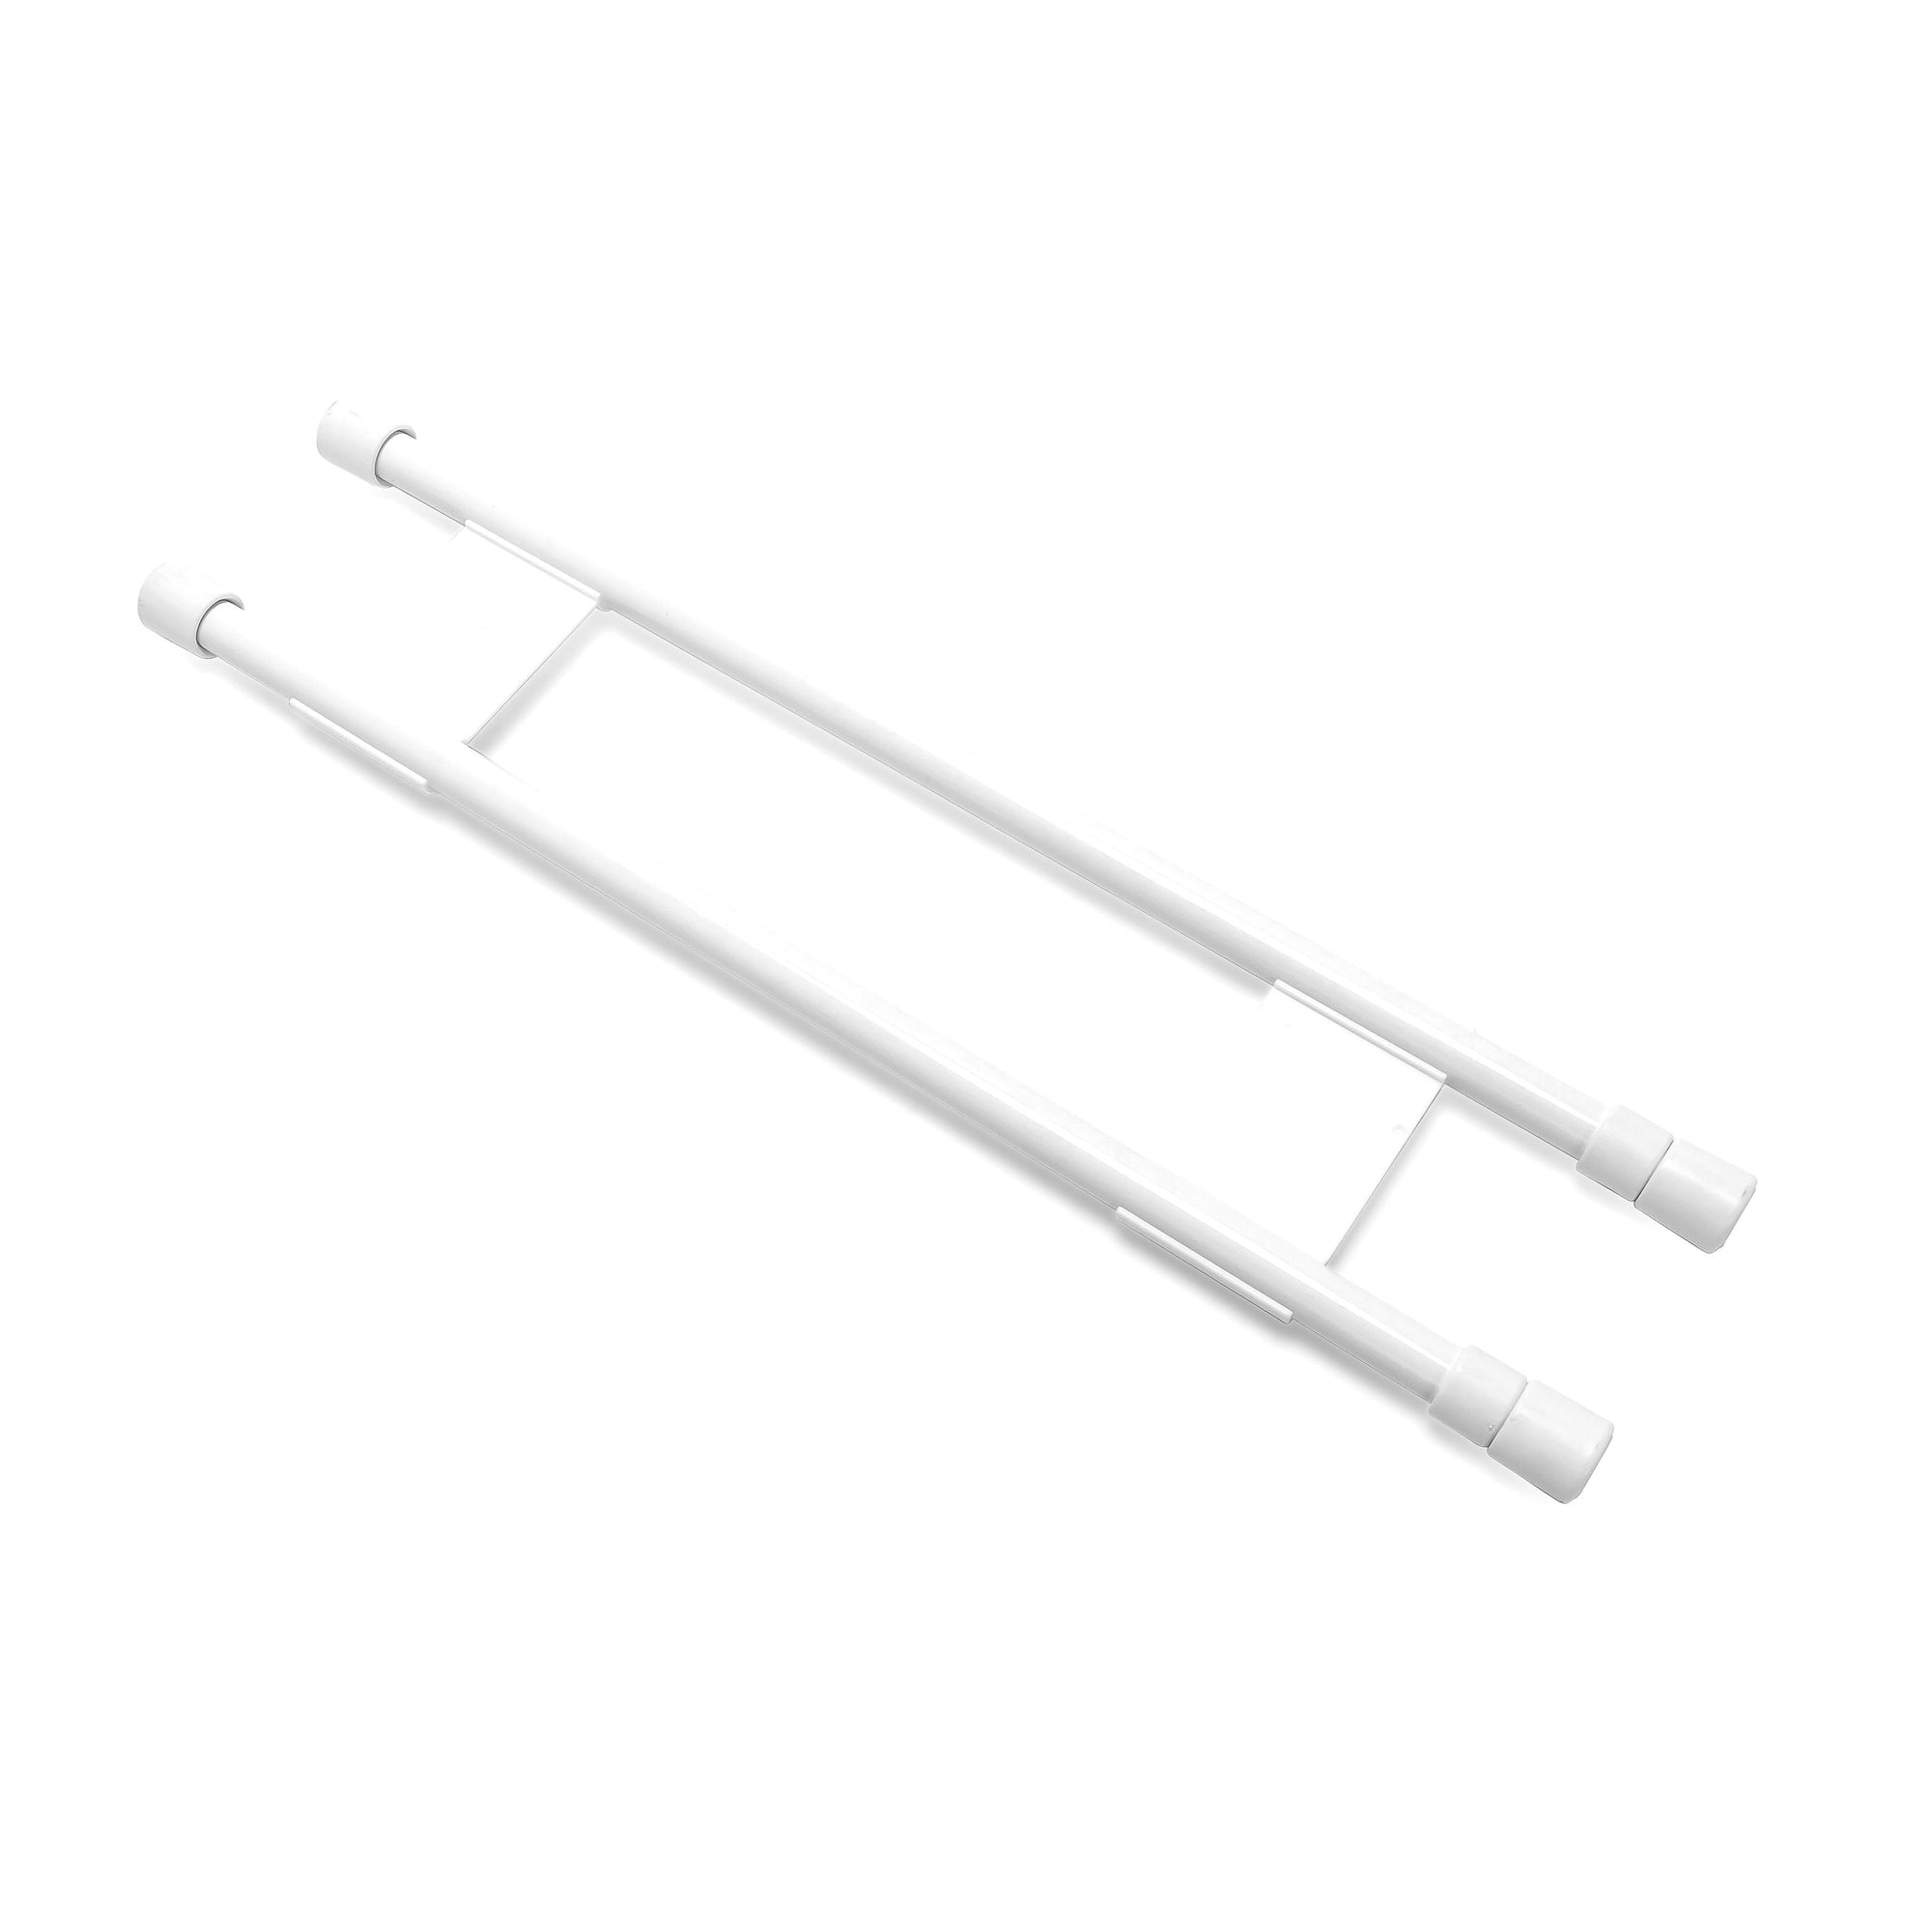 Camco 44063 Cupboard Bars - Double Bar, 1 Pack, White